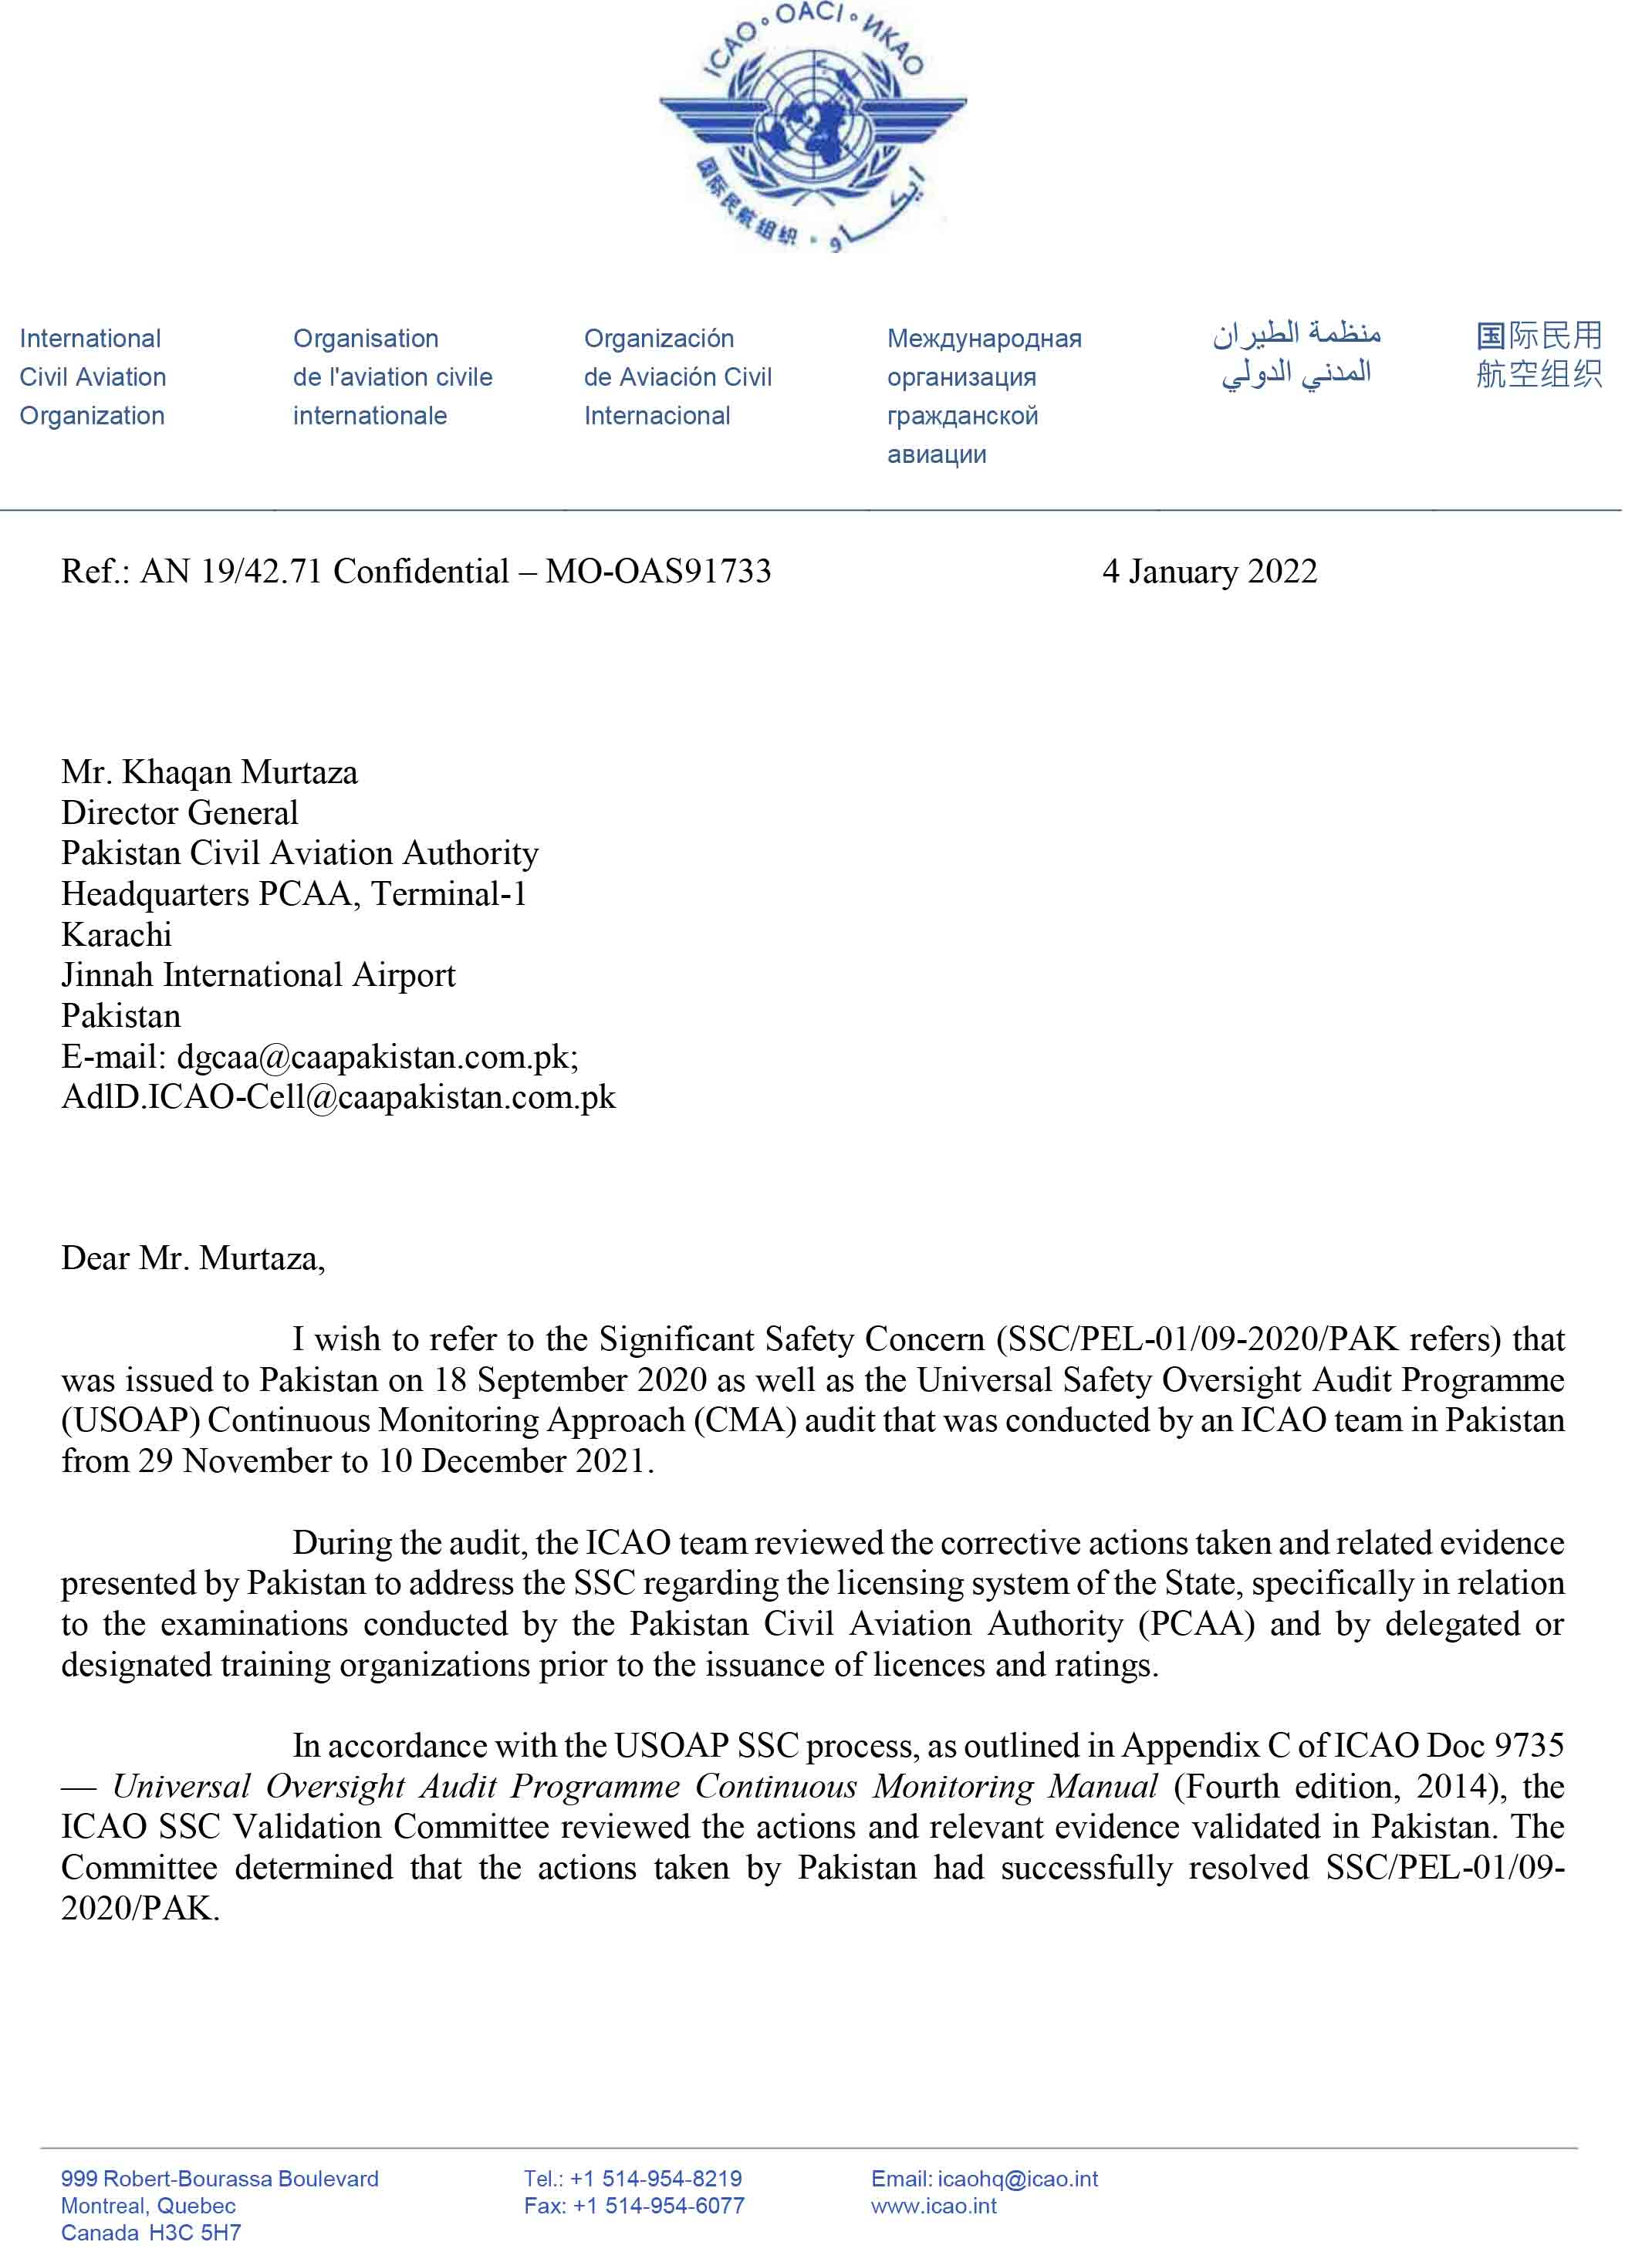 Image shows ICAO letter written to CAA.